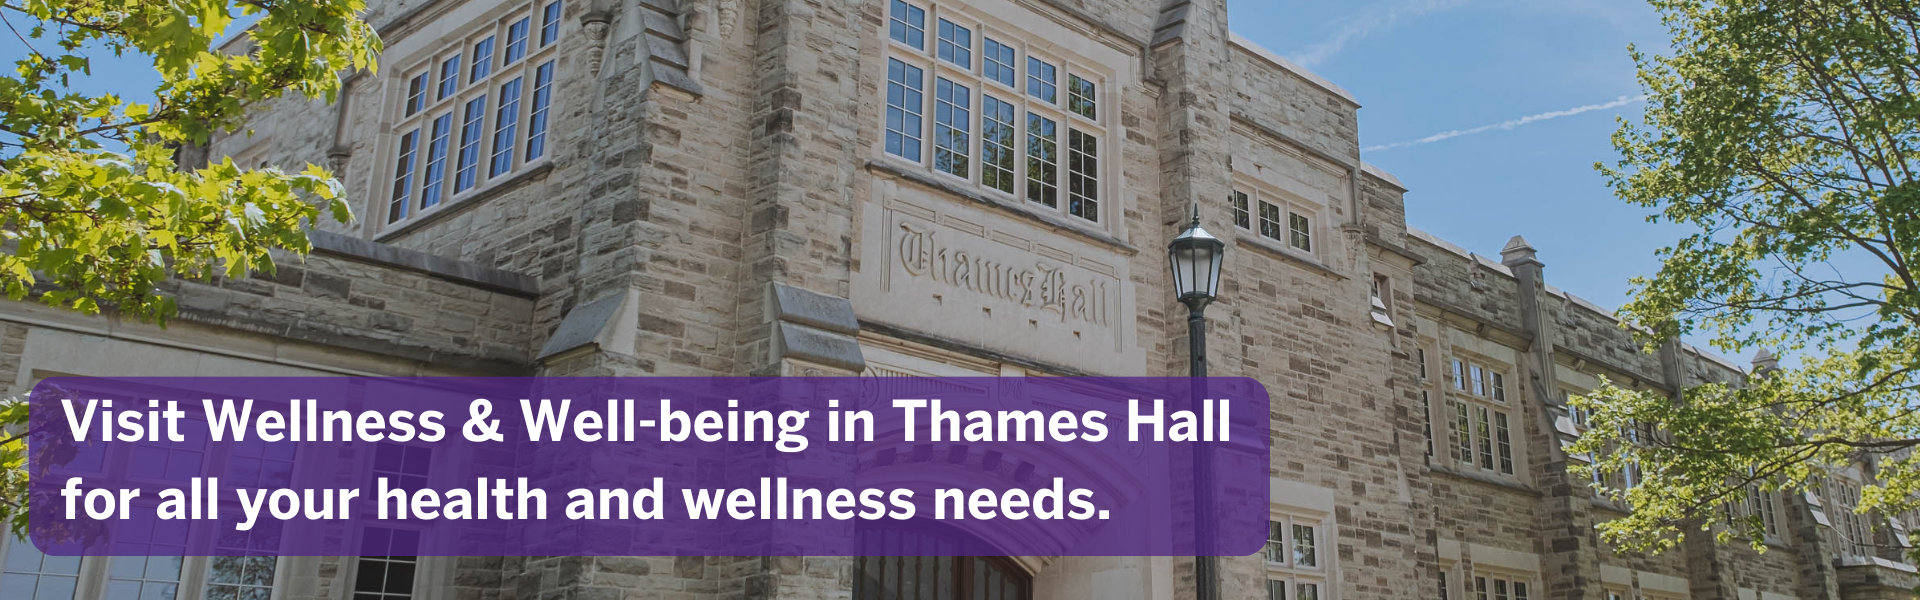 Wellness and Well-being Services